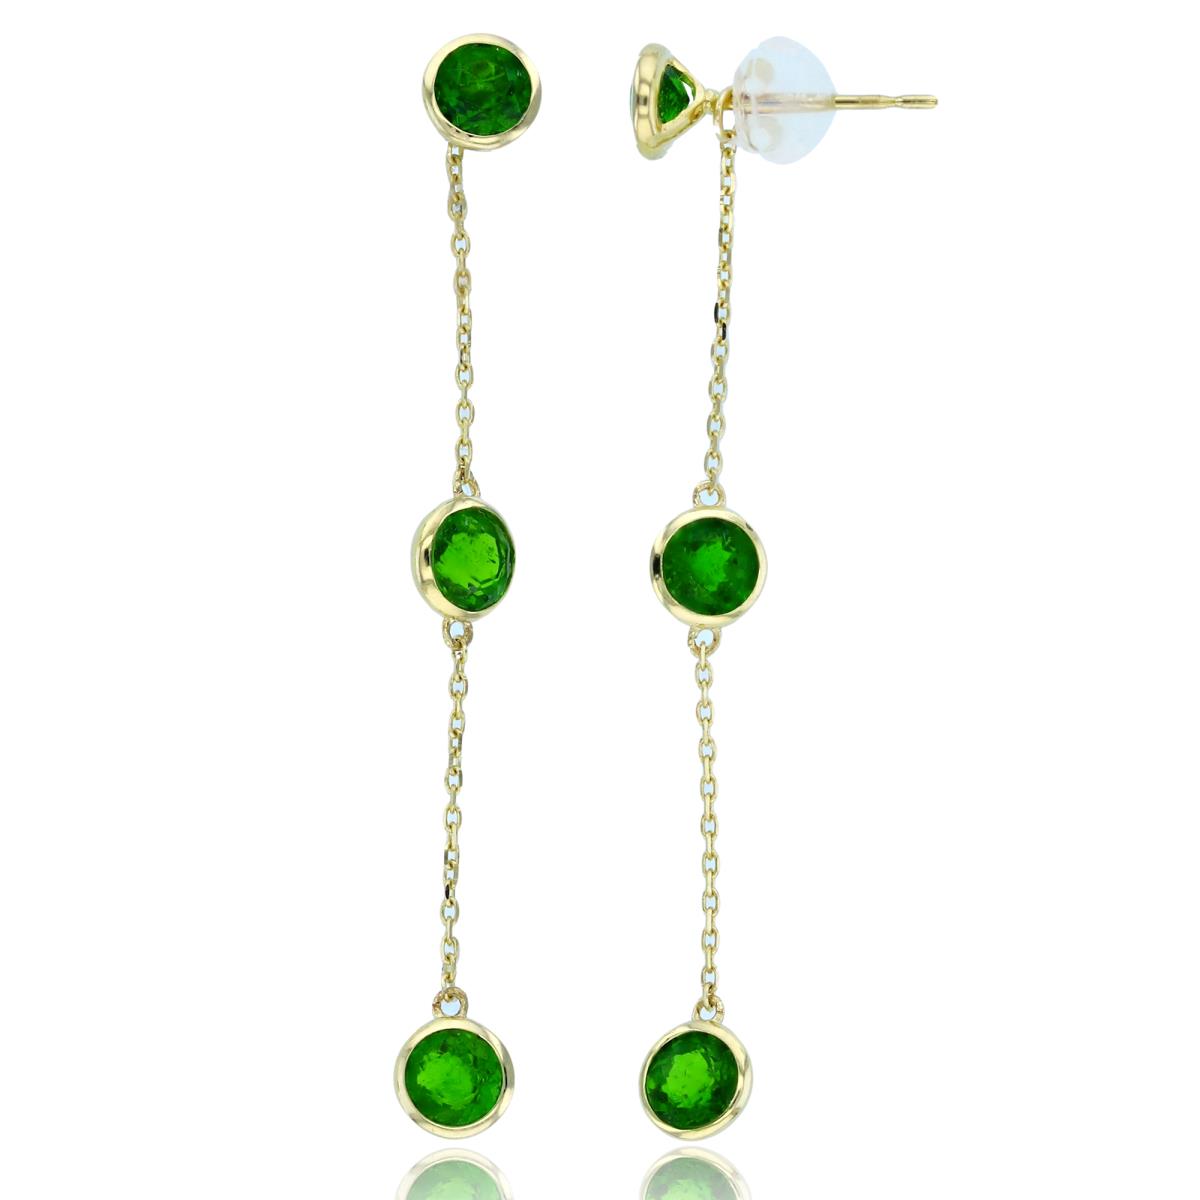 14K Yellow Gold 4mm Rnd Chrom Diopside Bezel Circles Station Earrings with Silicon Backs